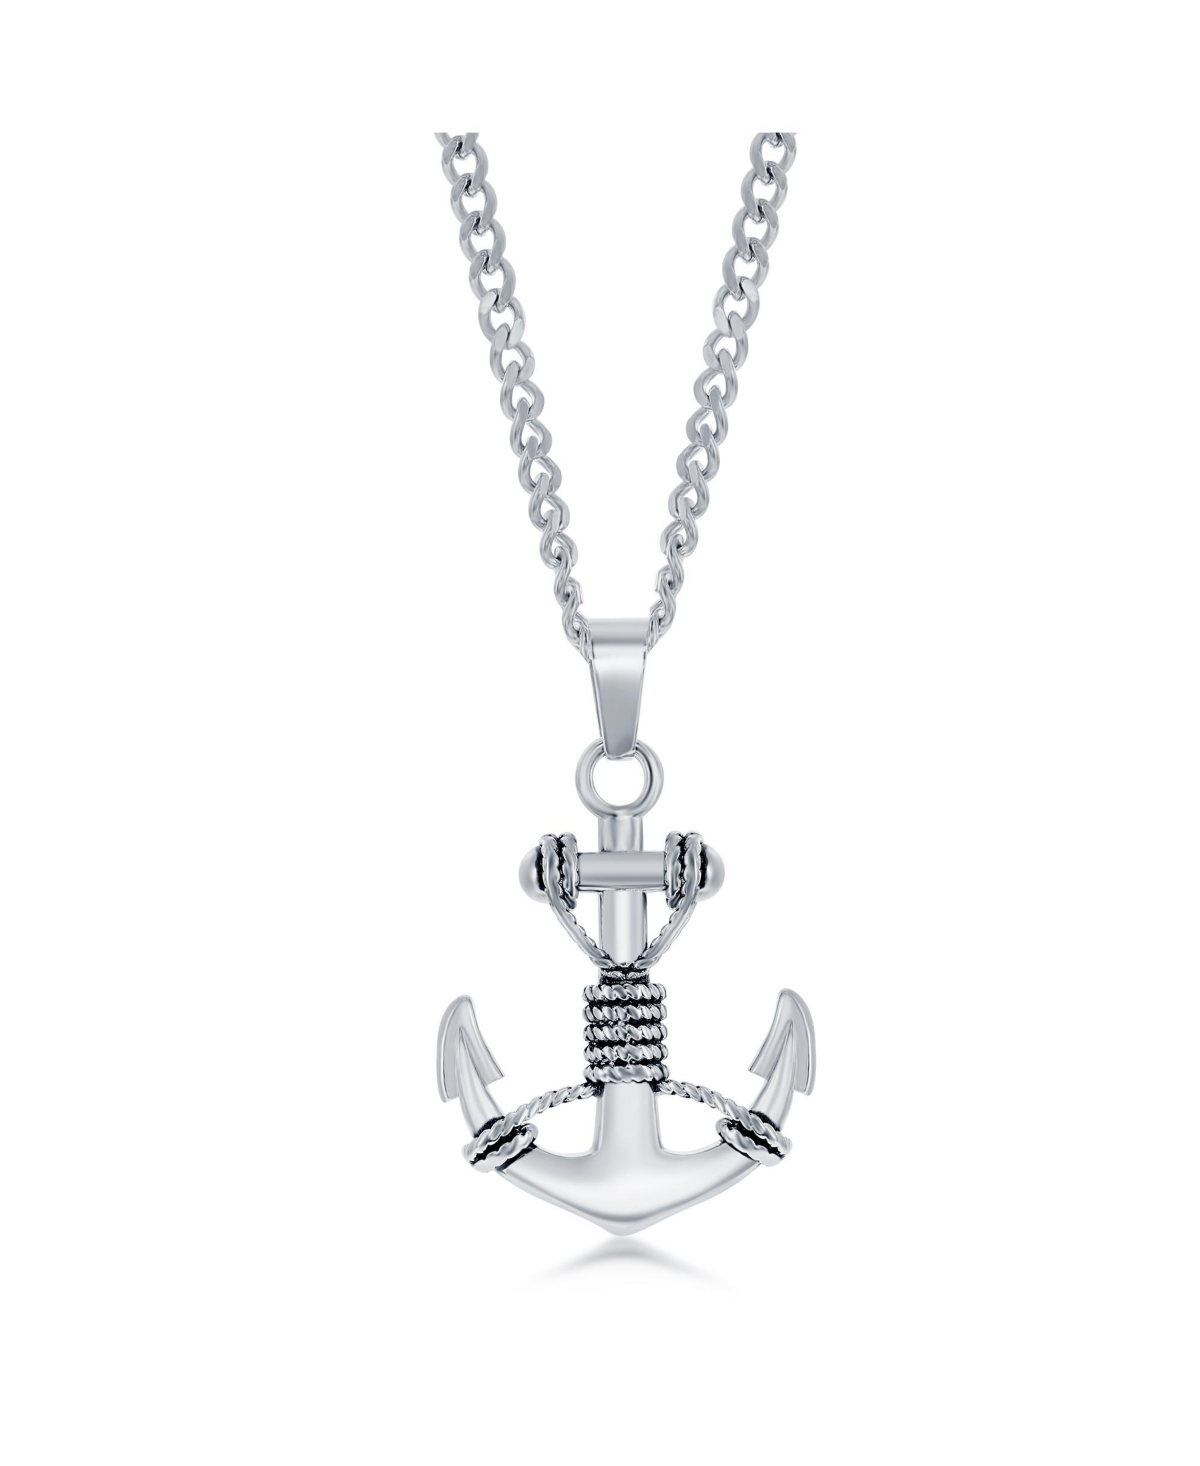 BLACKJACK STAINLESS STEEL ANCHOR NECKLACE